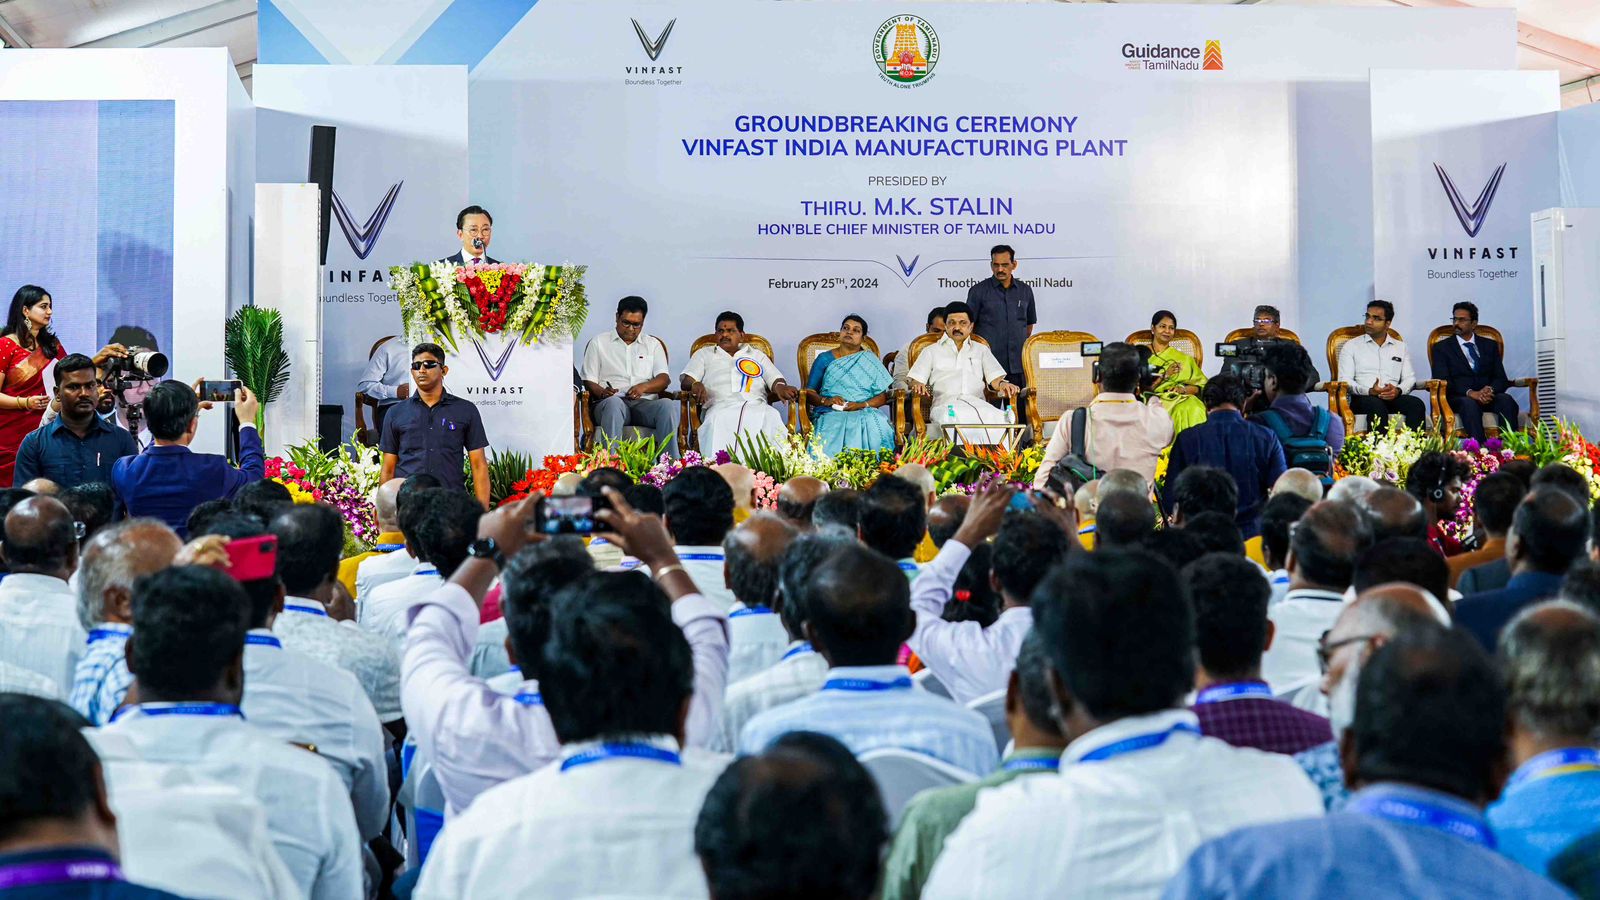 VinFast’s entry into India reaffirms Tamil Nadu’s progressive industrial policies and its role as a global automotive innovation and manufacturing hub